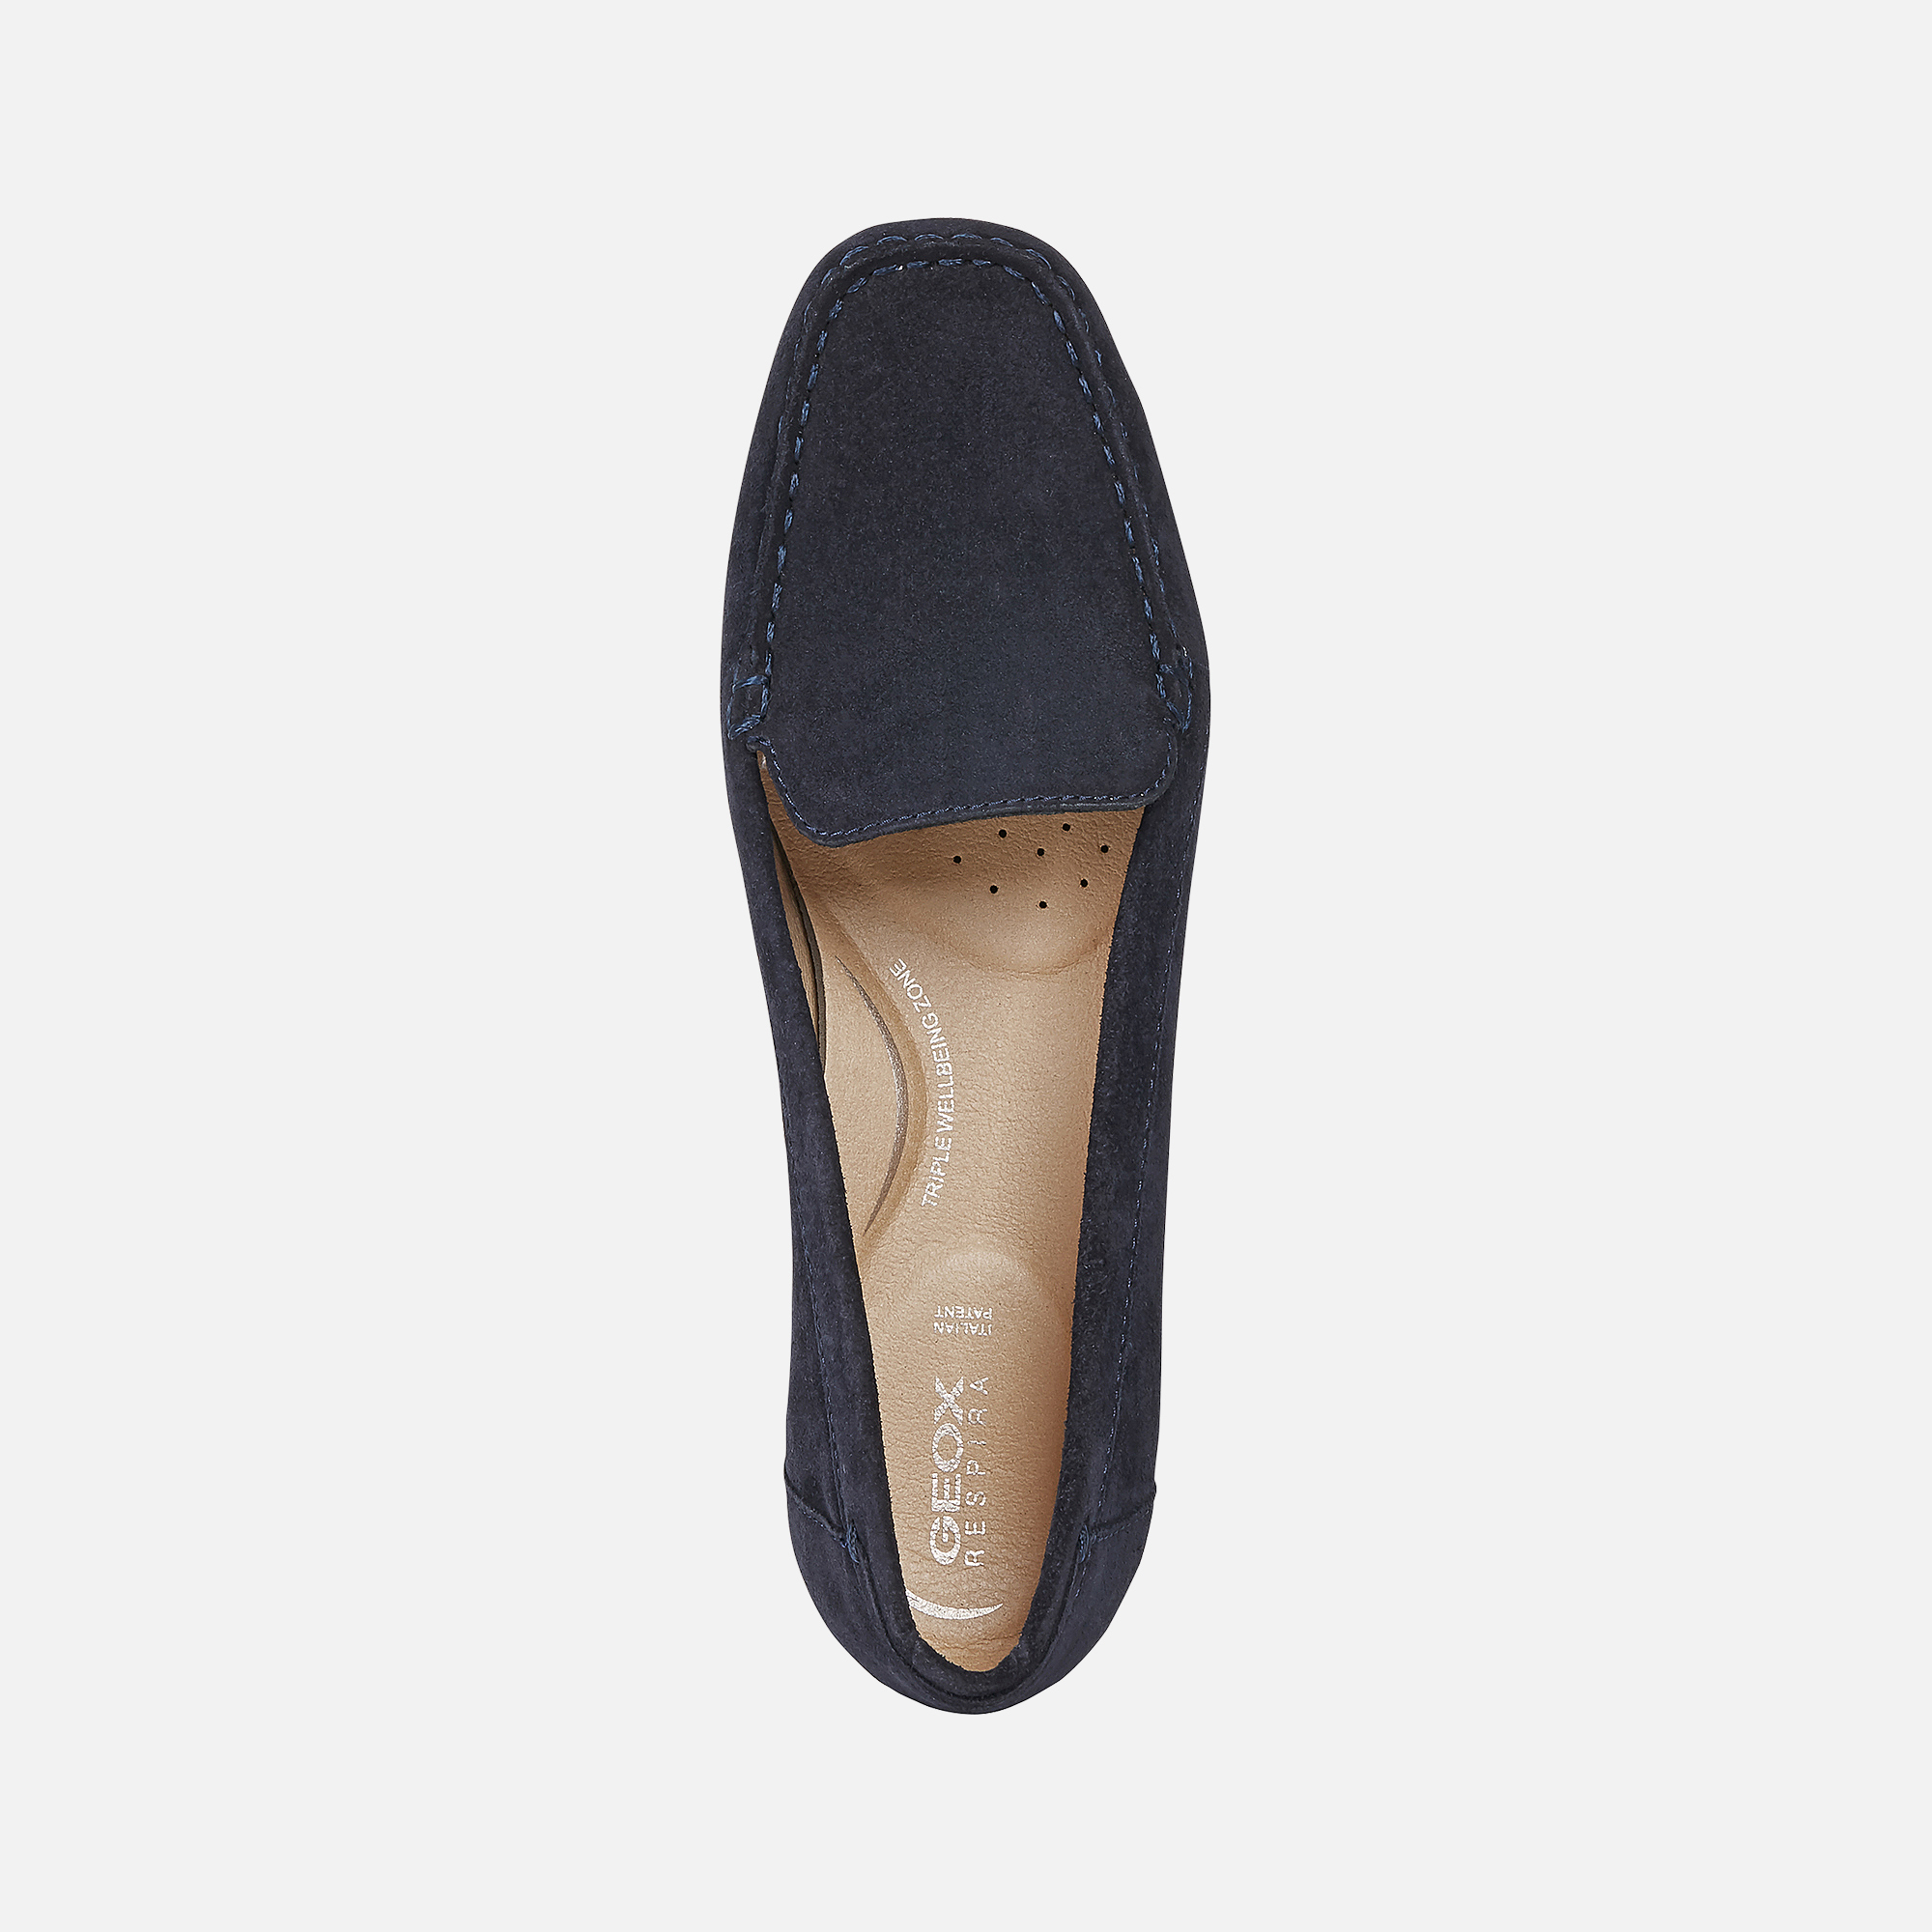 Geox ANNYTAH MOC Woman: Navy blue Loafers | Geox® FW20/21